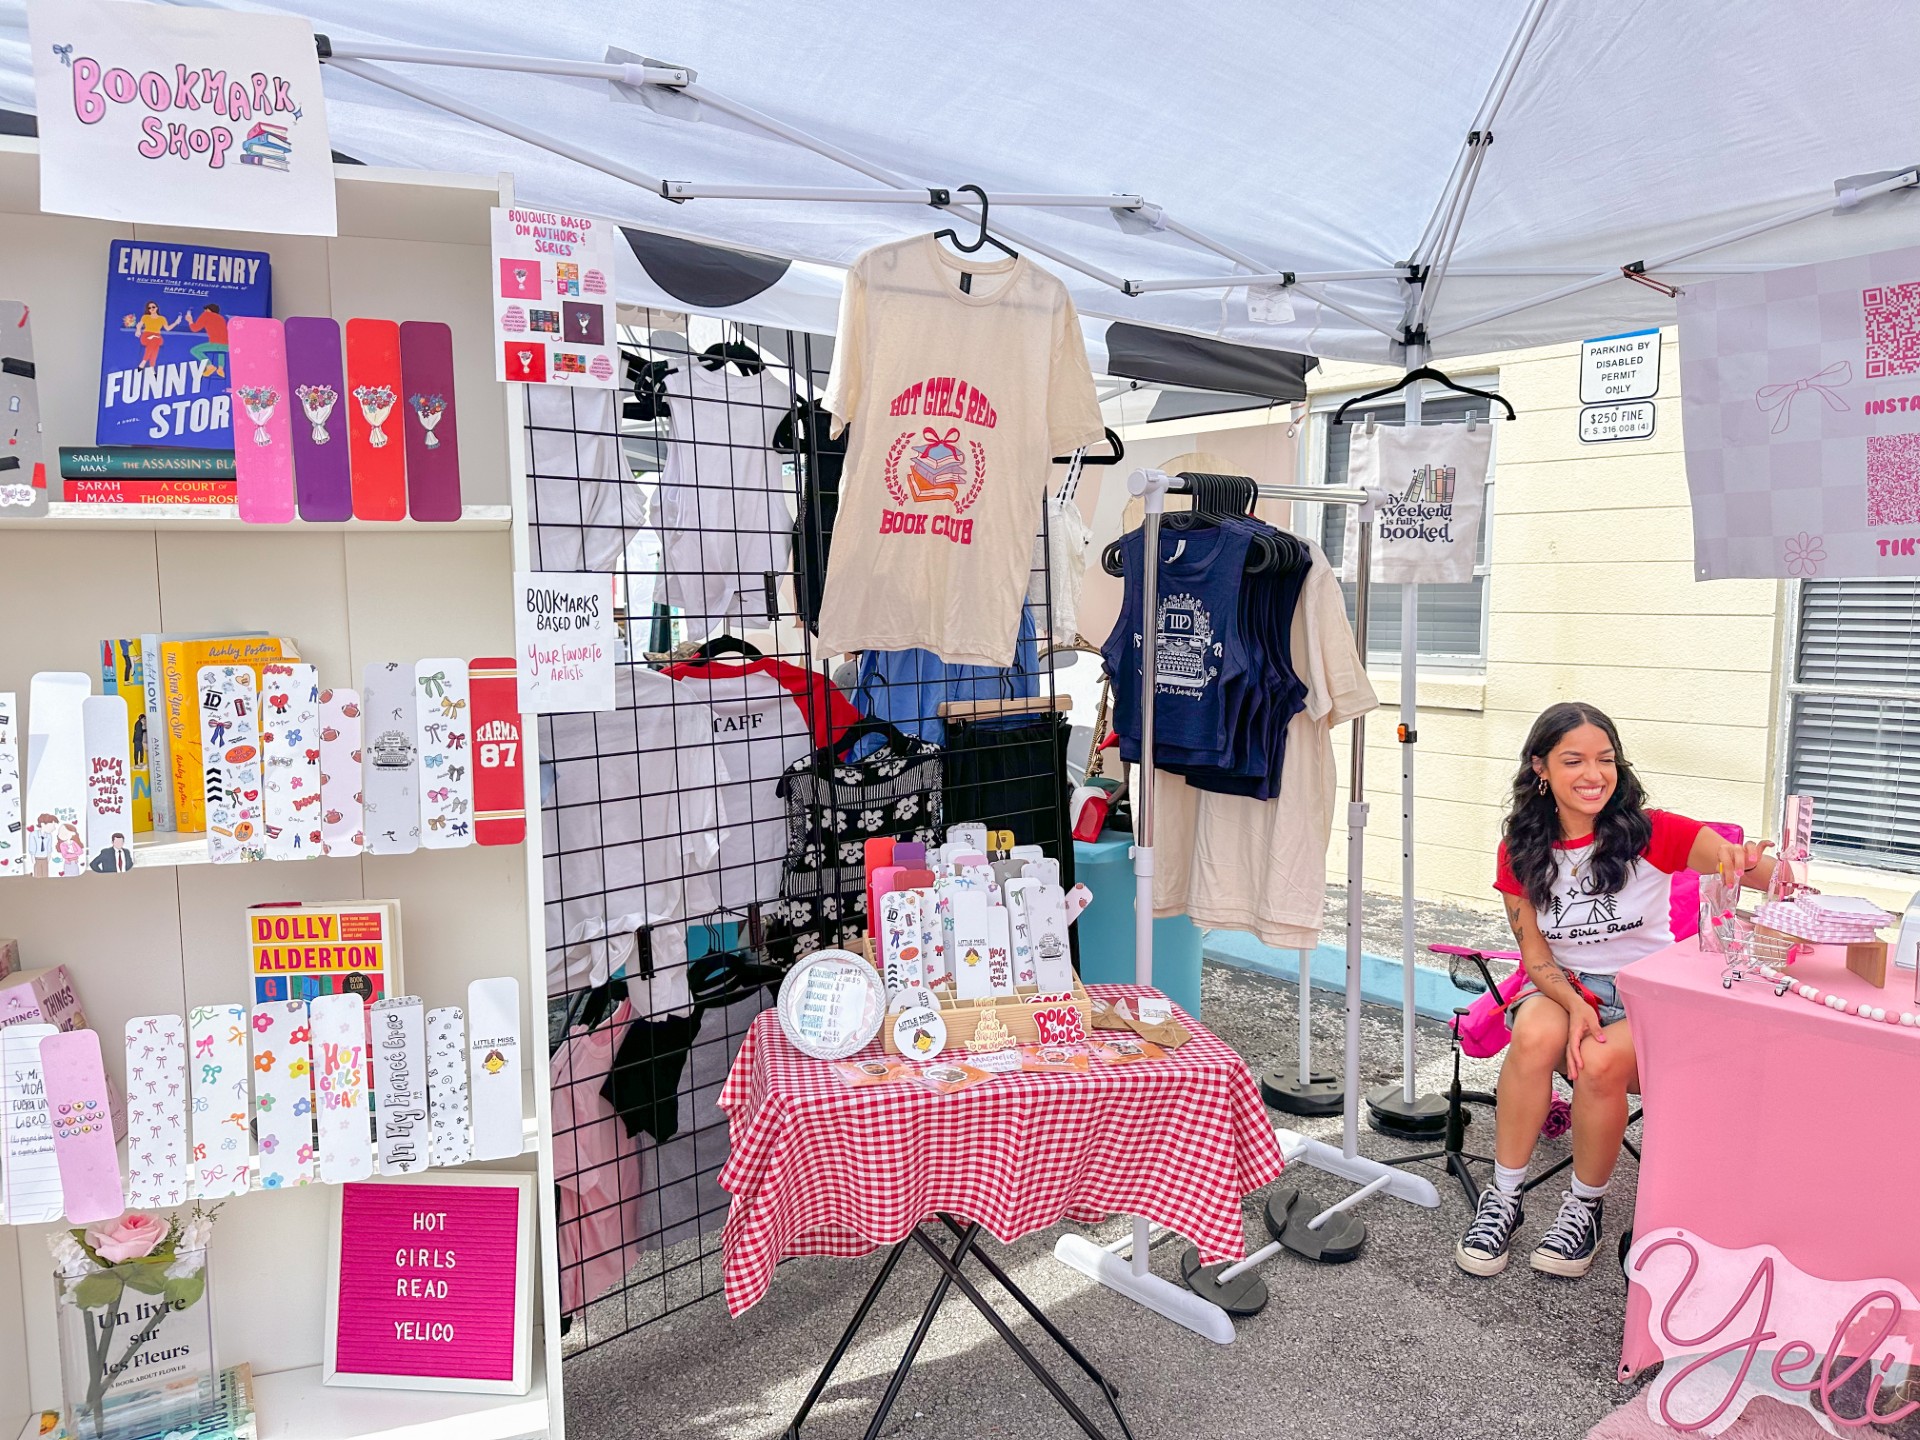 Pictured: YeliCo and Armor of God owner Aiyelis Otero sells pop-culture bookmarks and stickers. Otero vendored at the June 2 “Camp Hot Girl”.